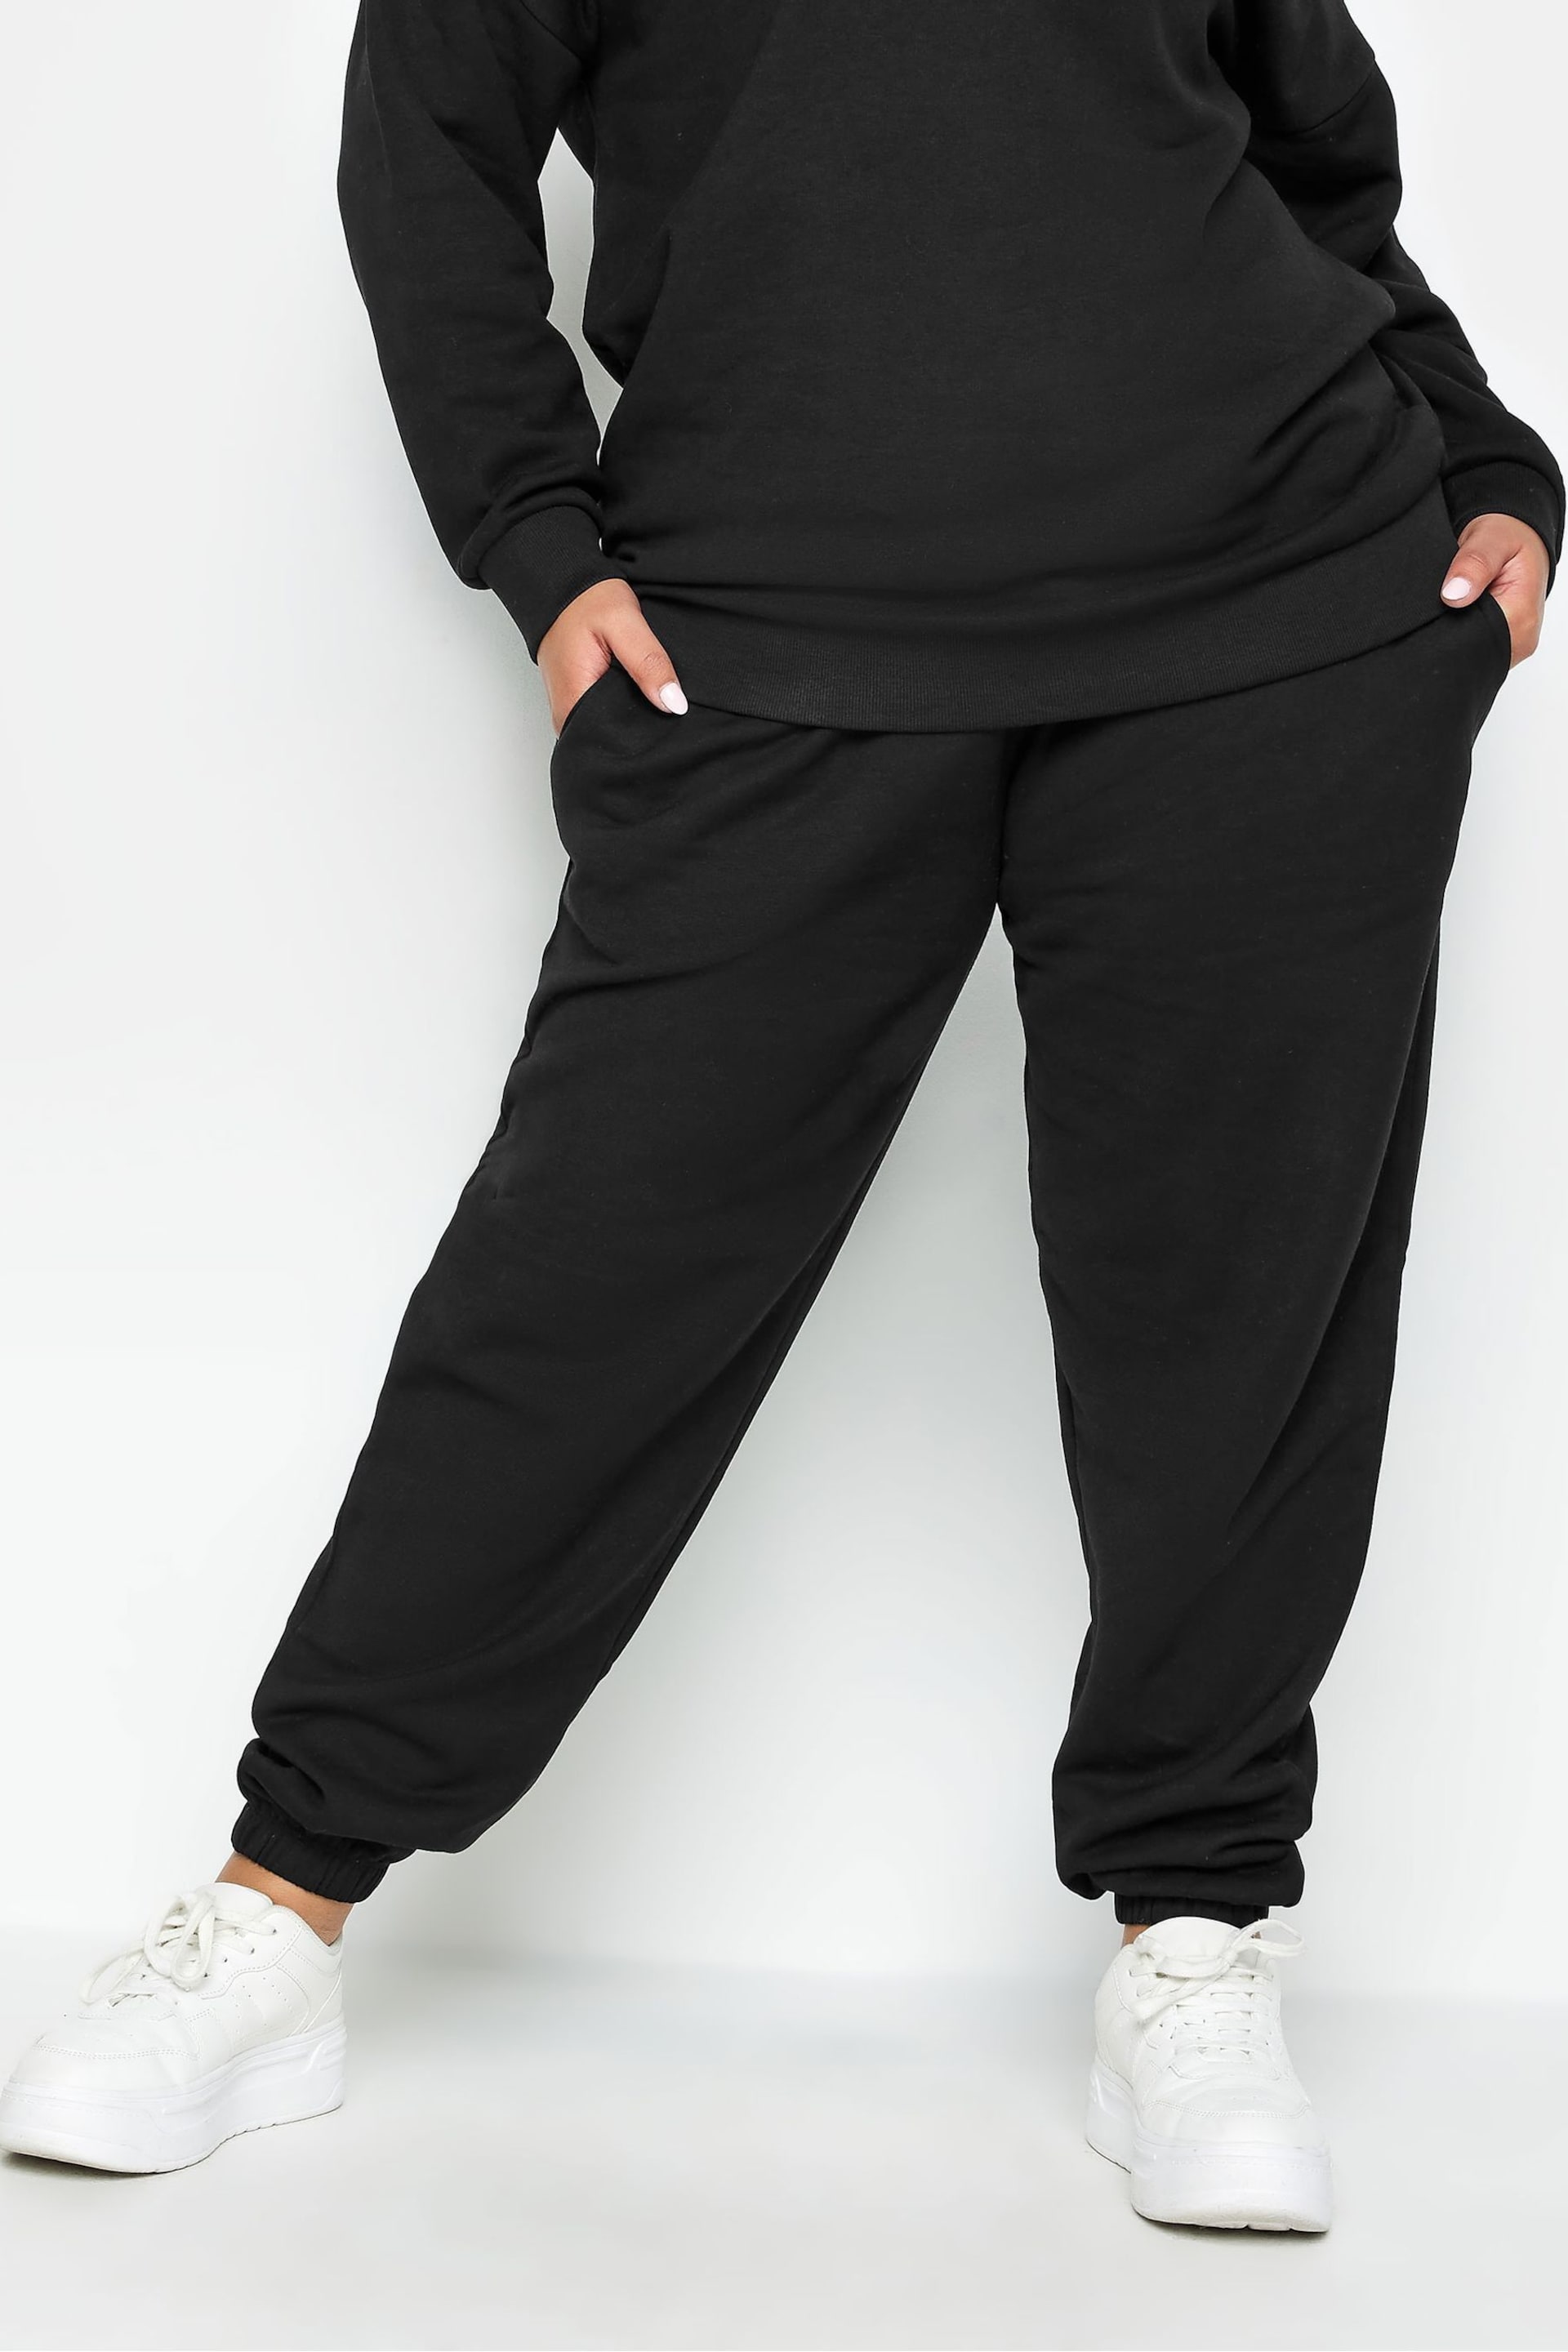 Yours Curve Black Joggers - Image 2 of 4